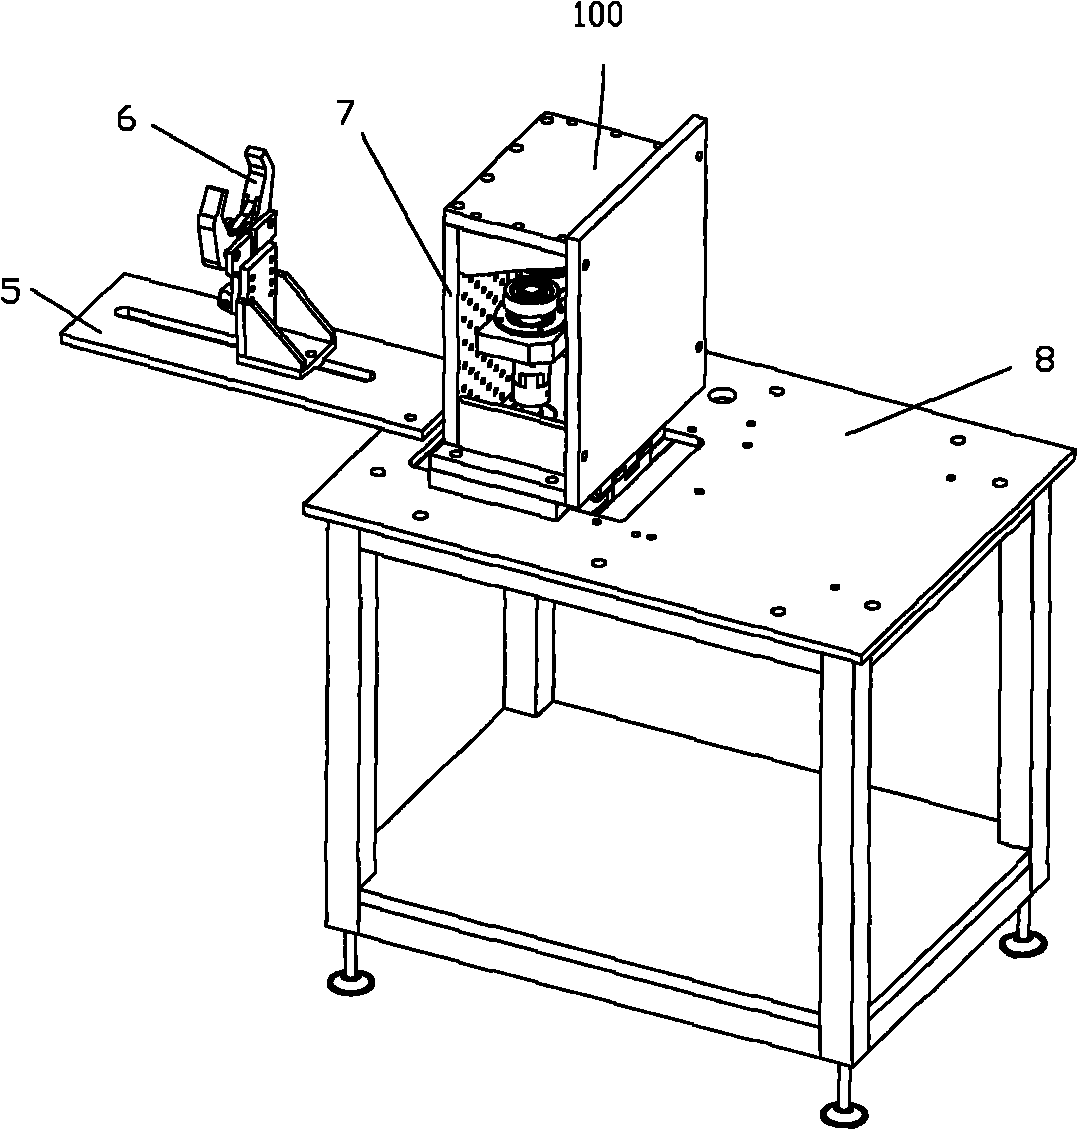 Testing device for load of jig saw